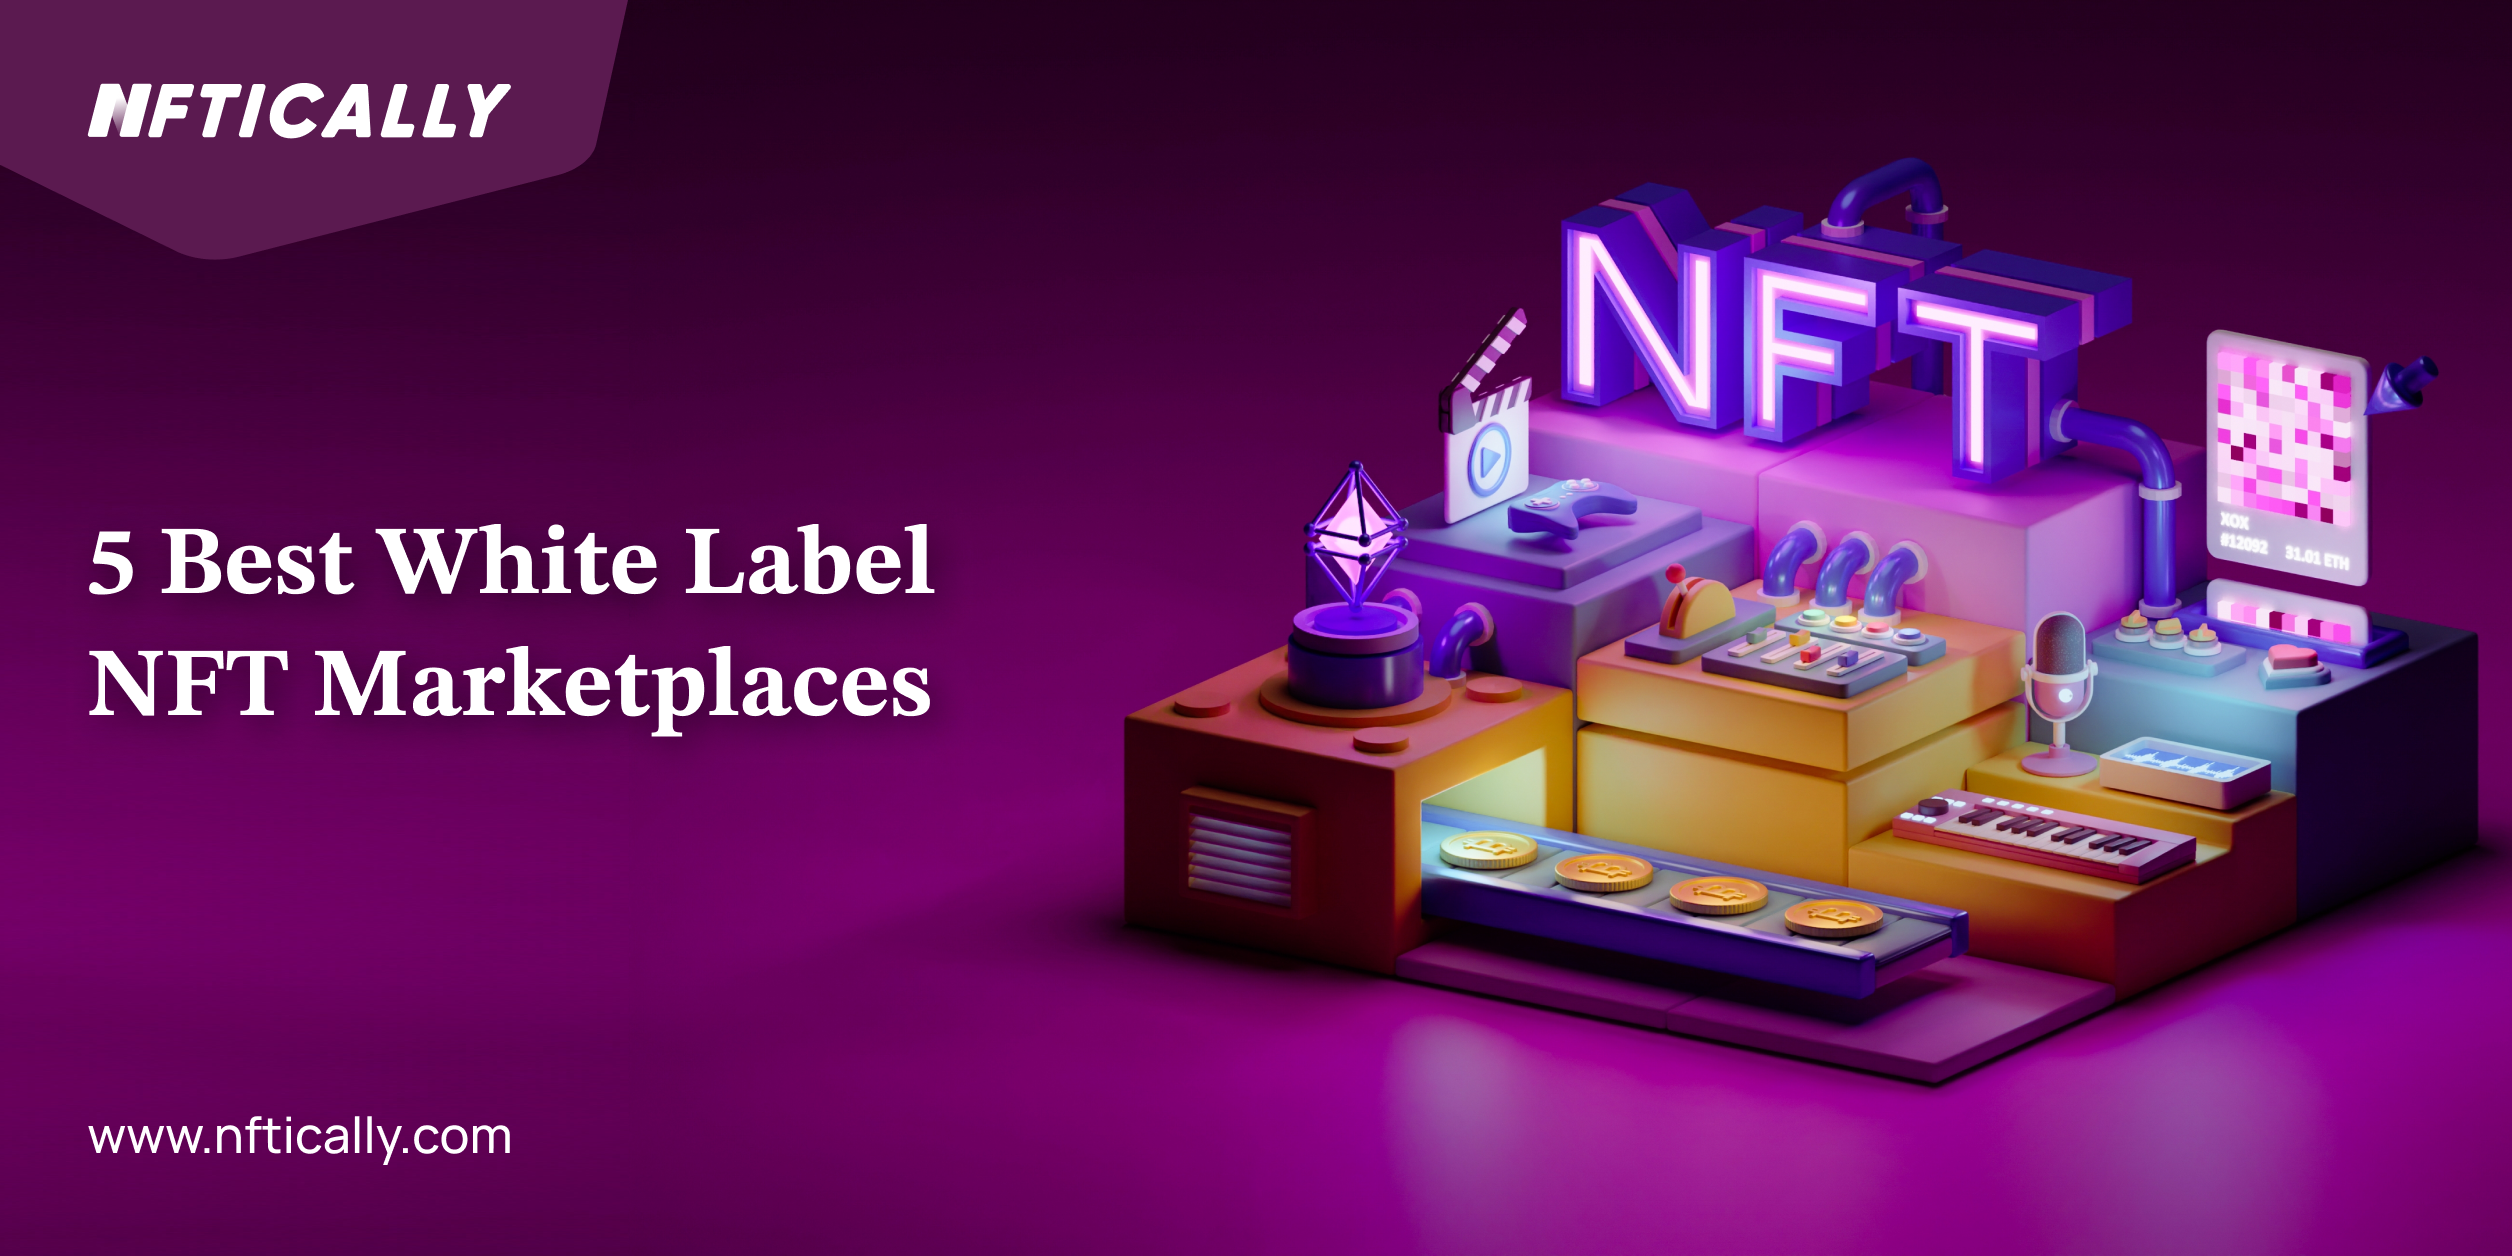 5 Best White Label NFT Marketplaces in The World: